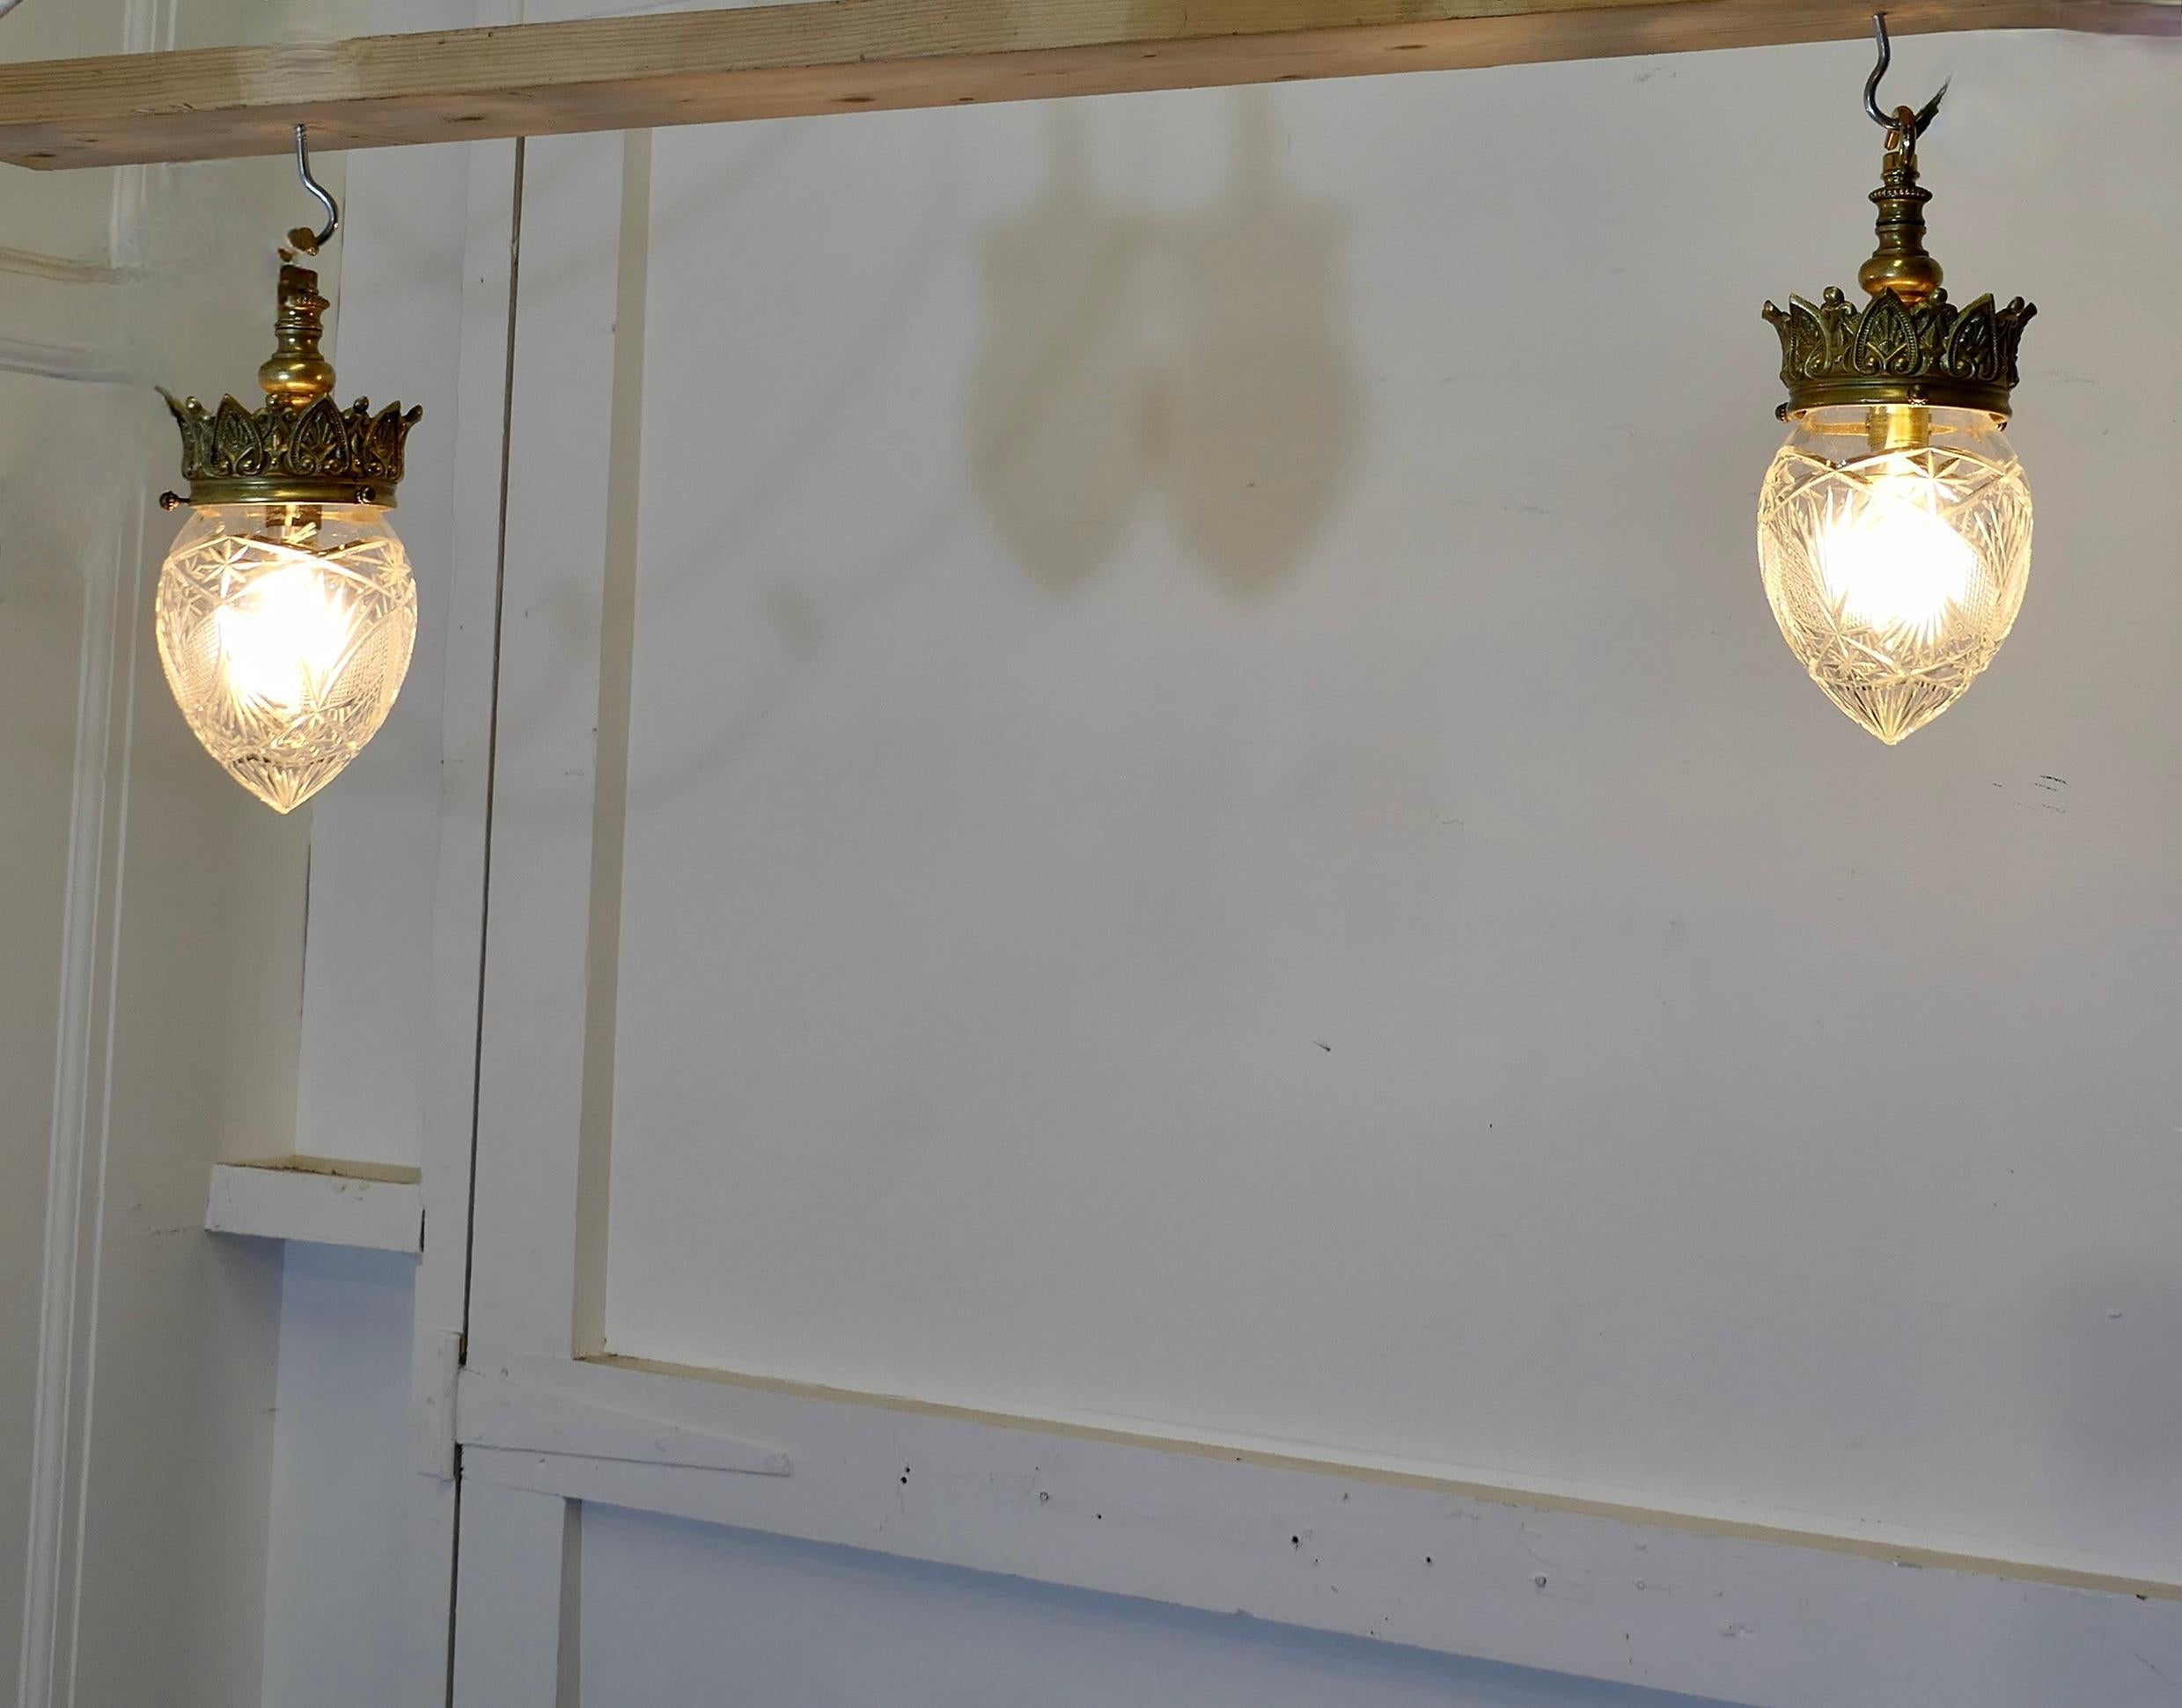  A Pair of Victorian Arts and Crafts Brass Ceiling Lights

The Lights have very decorative brass coronet gallery, they have their original Cut Crystal Shades 

All in working order, these lights will need to be connected to an electrical supply 
The